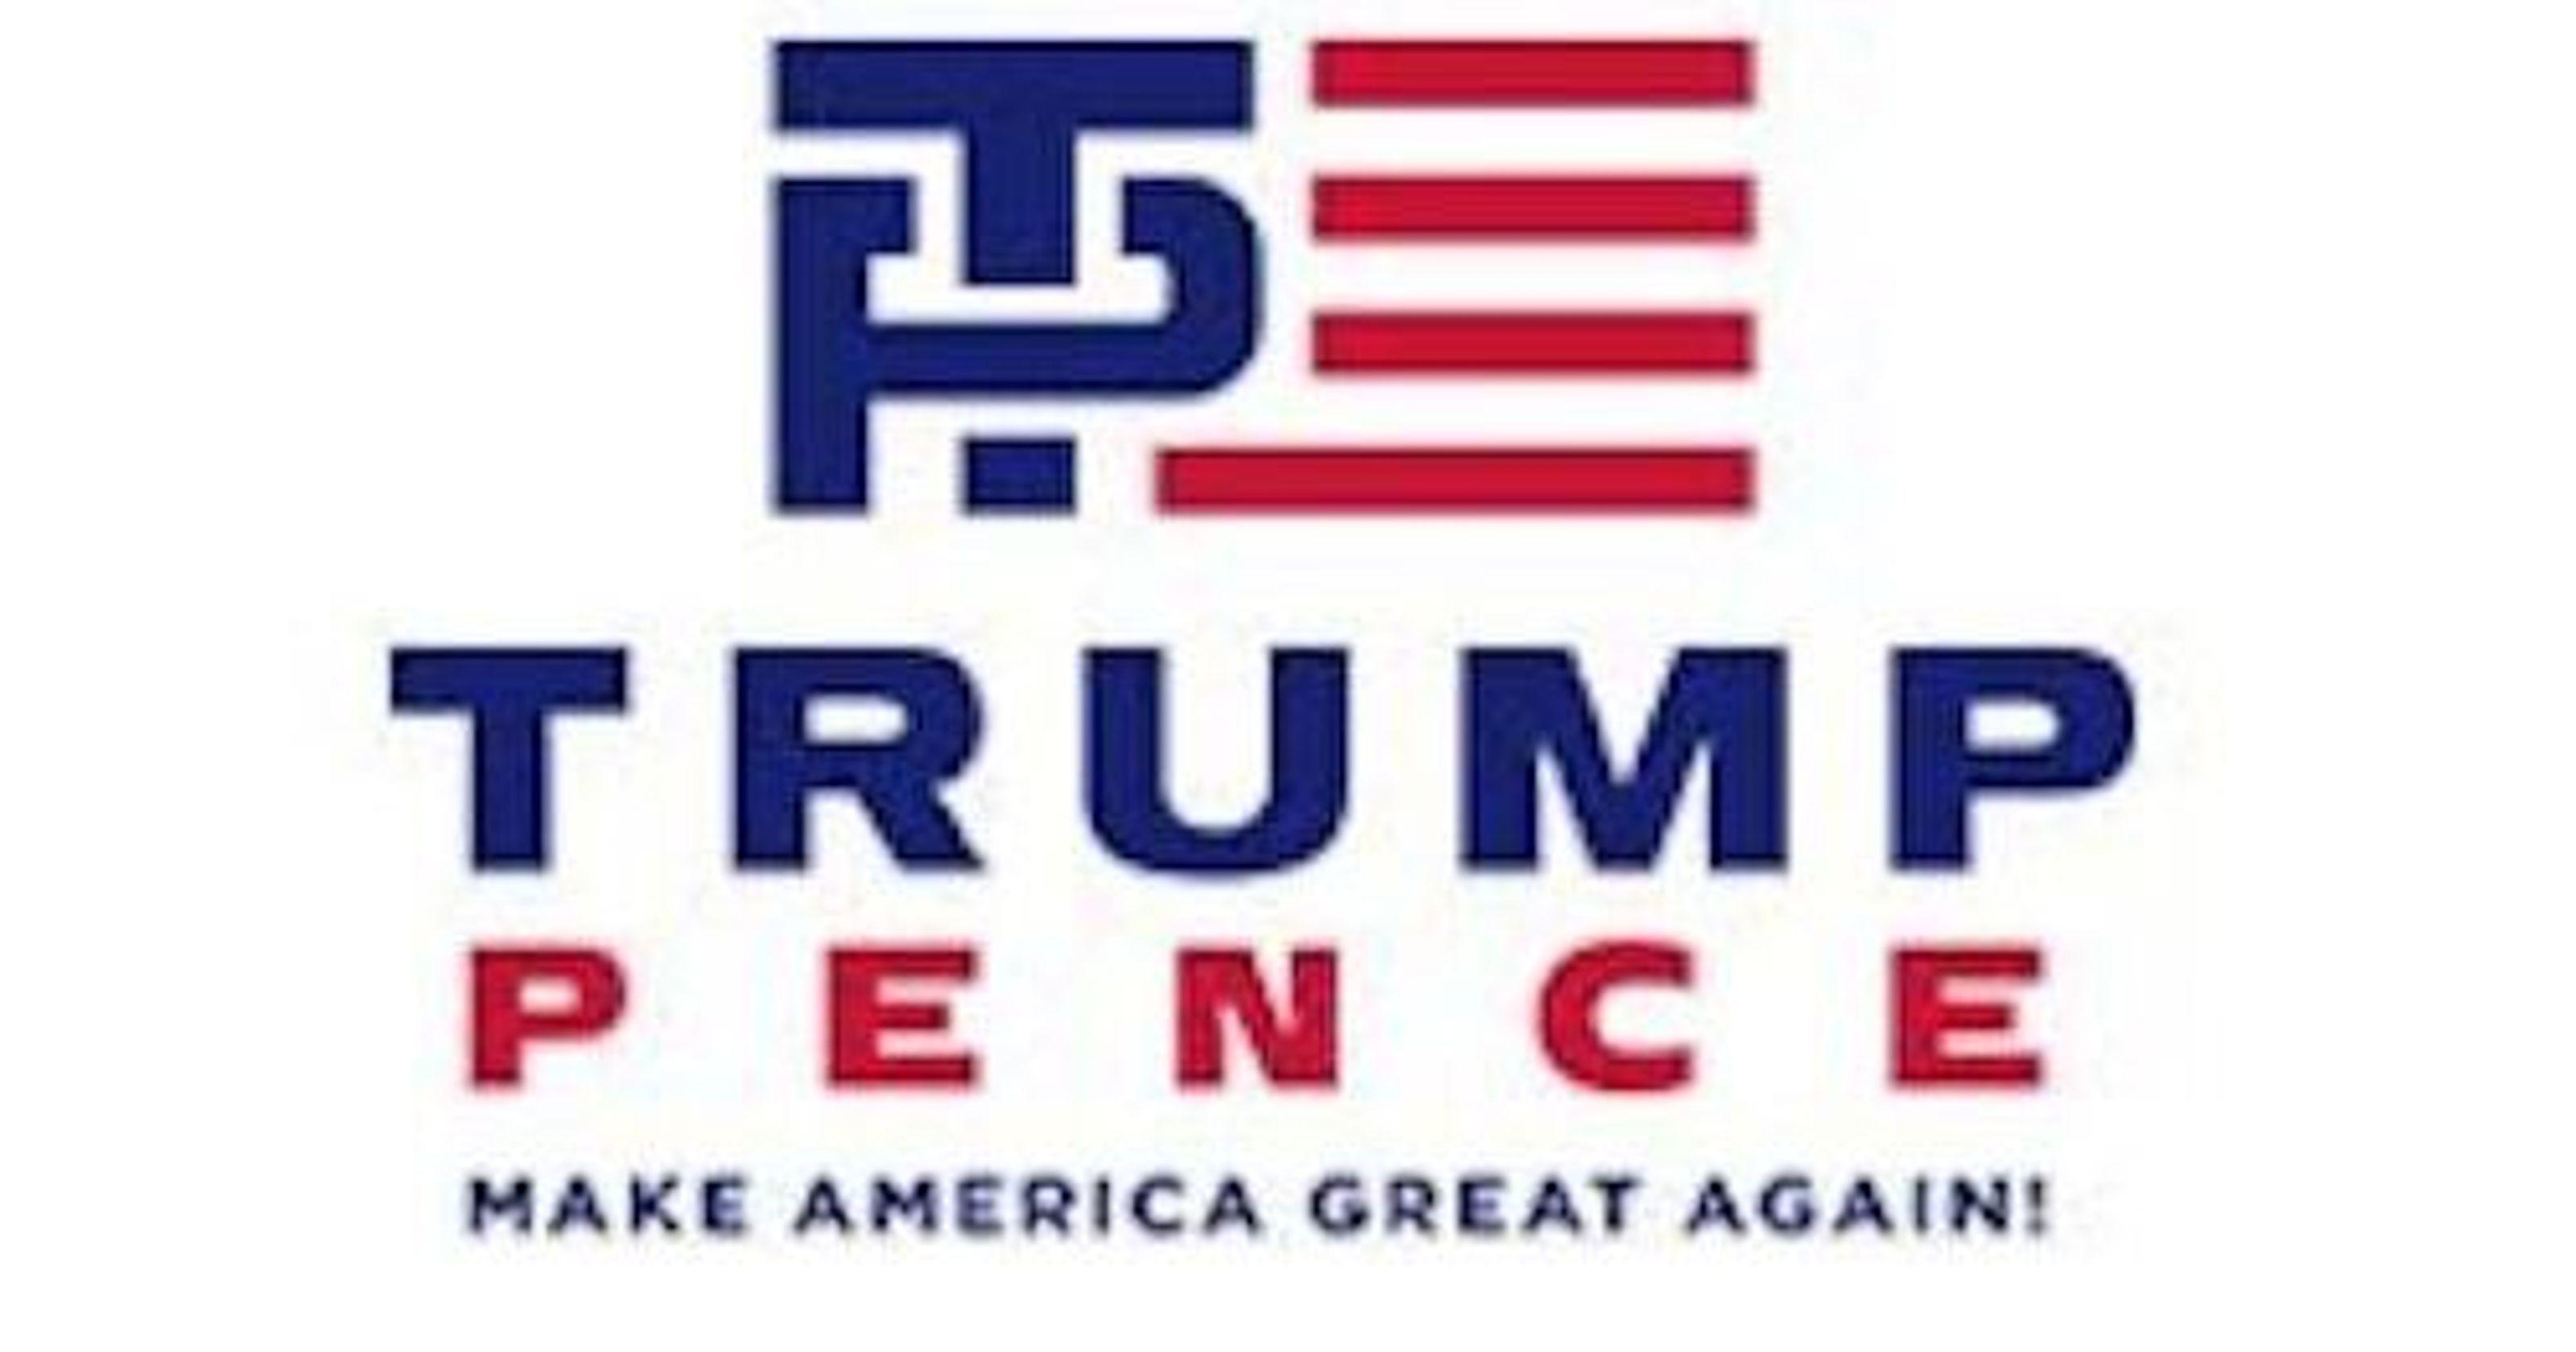 Inappropriate Logo - Inappropriate': Graphic Designers, Twitter Pan The New Trump Pence Logo